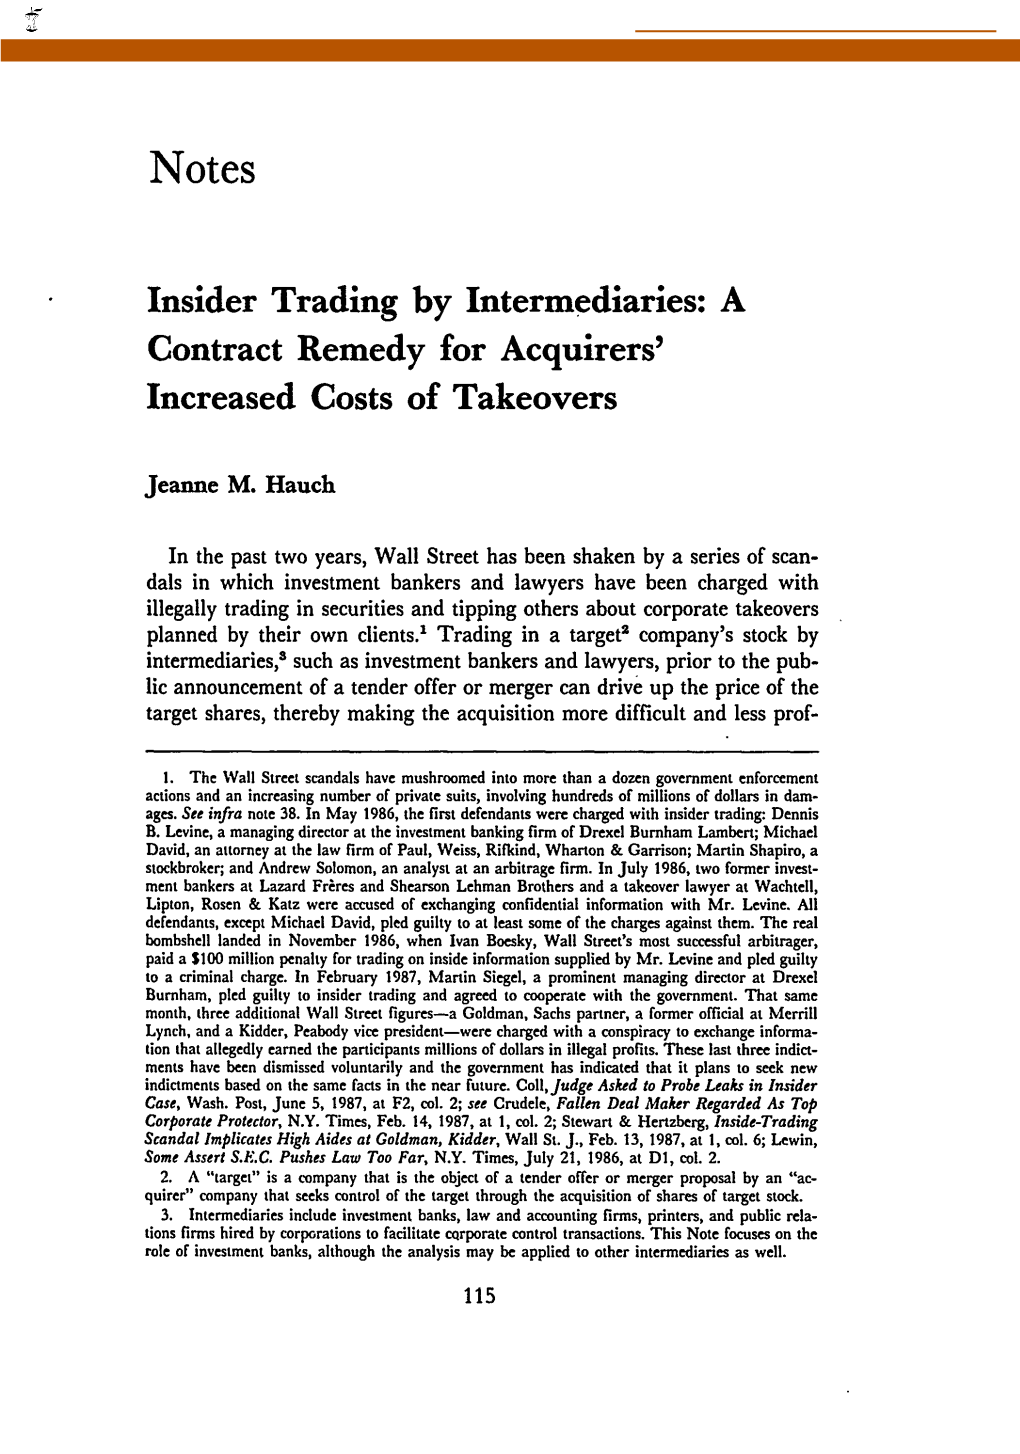 Insider Trading by Intermediaries: a Contract Remedy for Acquirers' Increased Costs of Takeovers